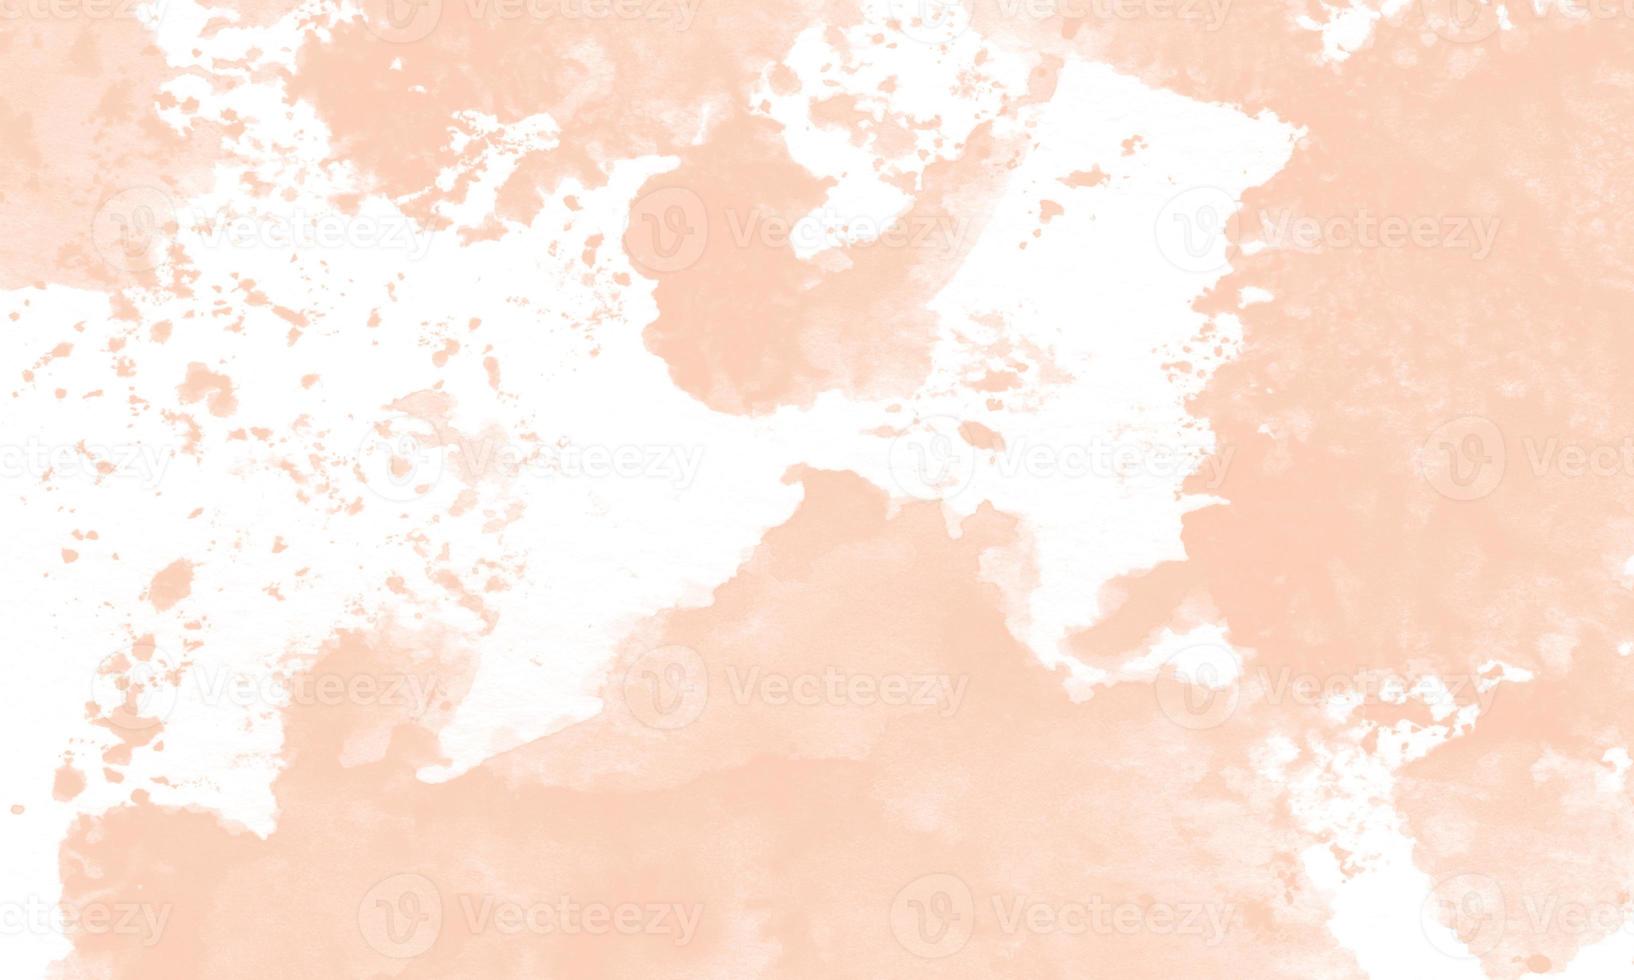 Creative abstract hand painted background with apricot color photo